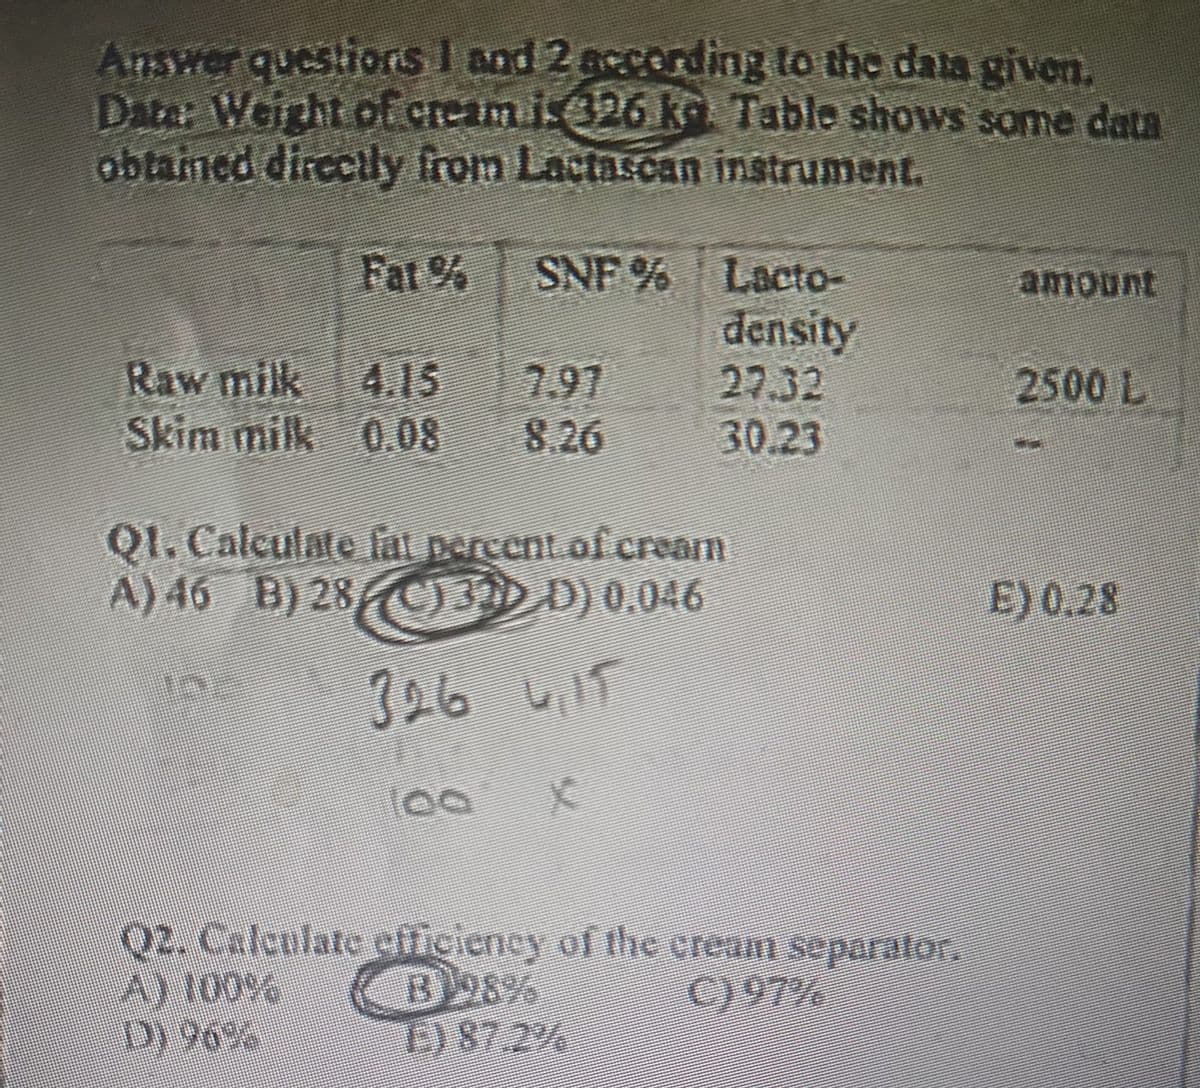 Answer questions 1 and 2 according to the data given.
Dater Weight of cream i: 326 kỳ. Table shows some data
obtained directly from Lactascan instrument.
Fat % SNF % Lacto-
density
27.32
30.23
Raw milk 4.15 7.97
Skim milk 0.08 8.26
Q1. Calculate fat percent of creamn
A) 46 B) 28 (C) 3D D) 0.046
آدرما 396
100 x
Q2. Calculate efficiency of the cream separator.
A) 100%
B98%
C) 97%
D) 96%
E) 87.2%
amount
2500 L
E) 0.28